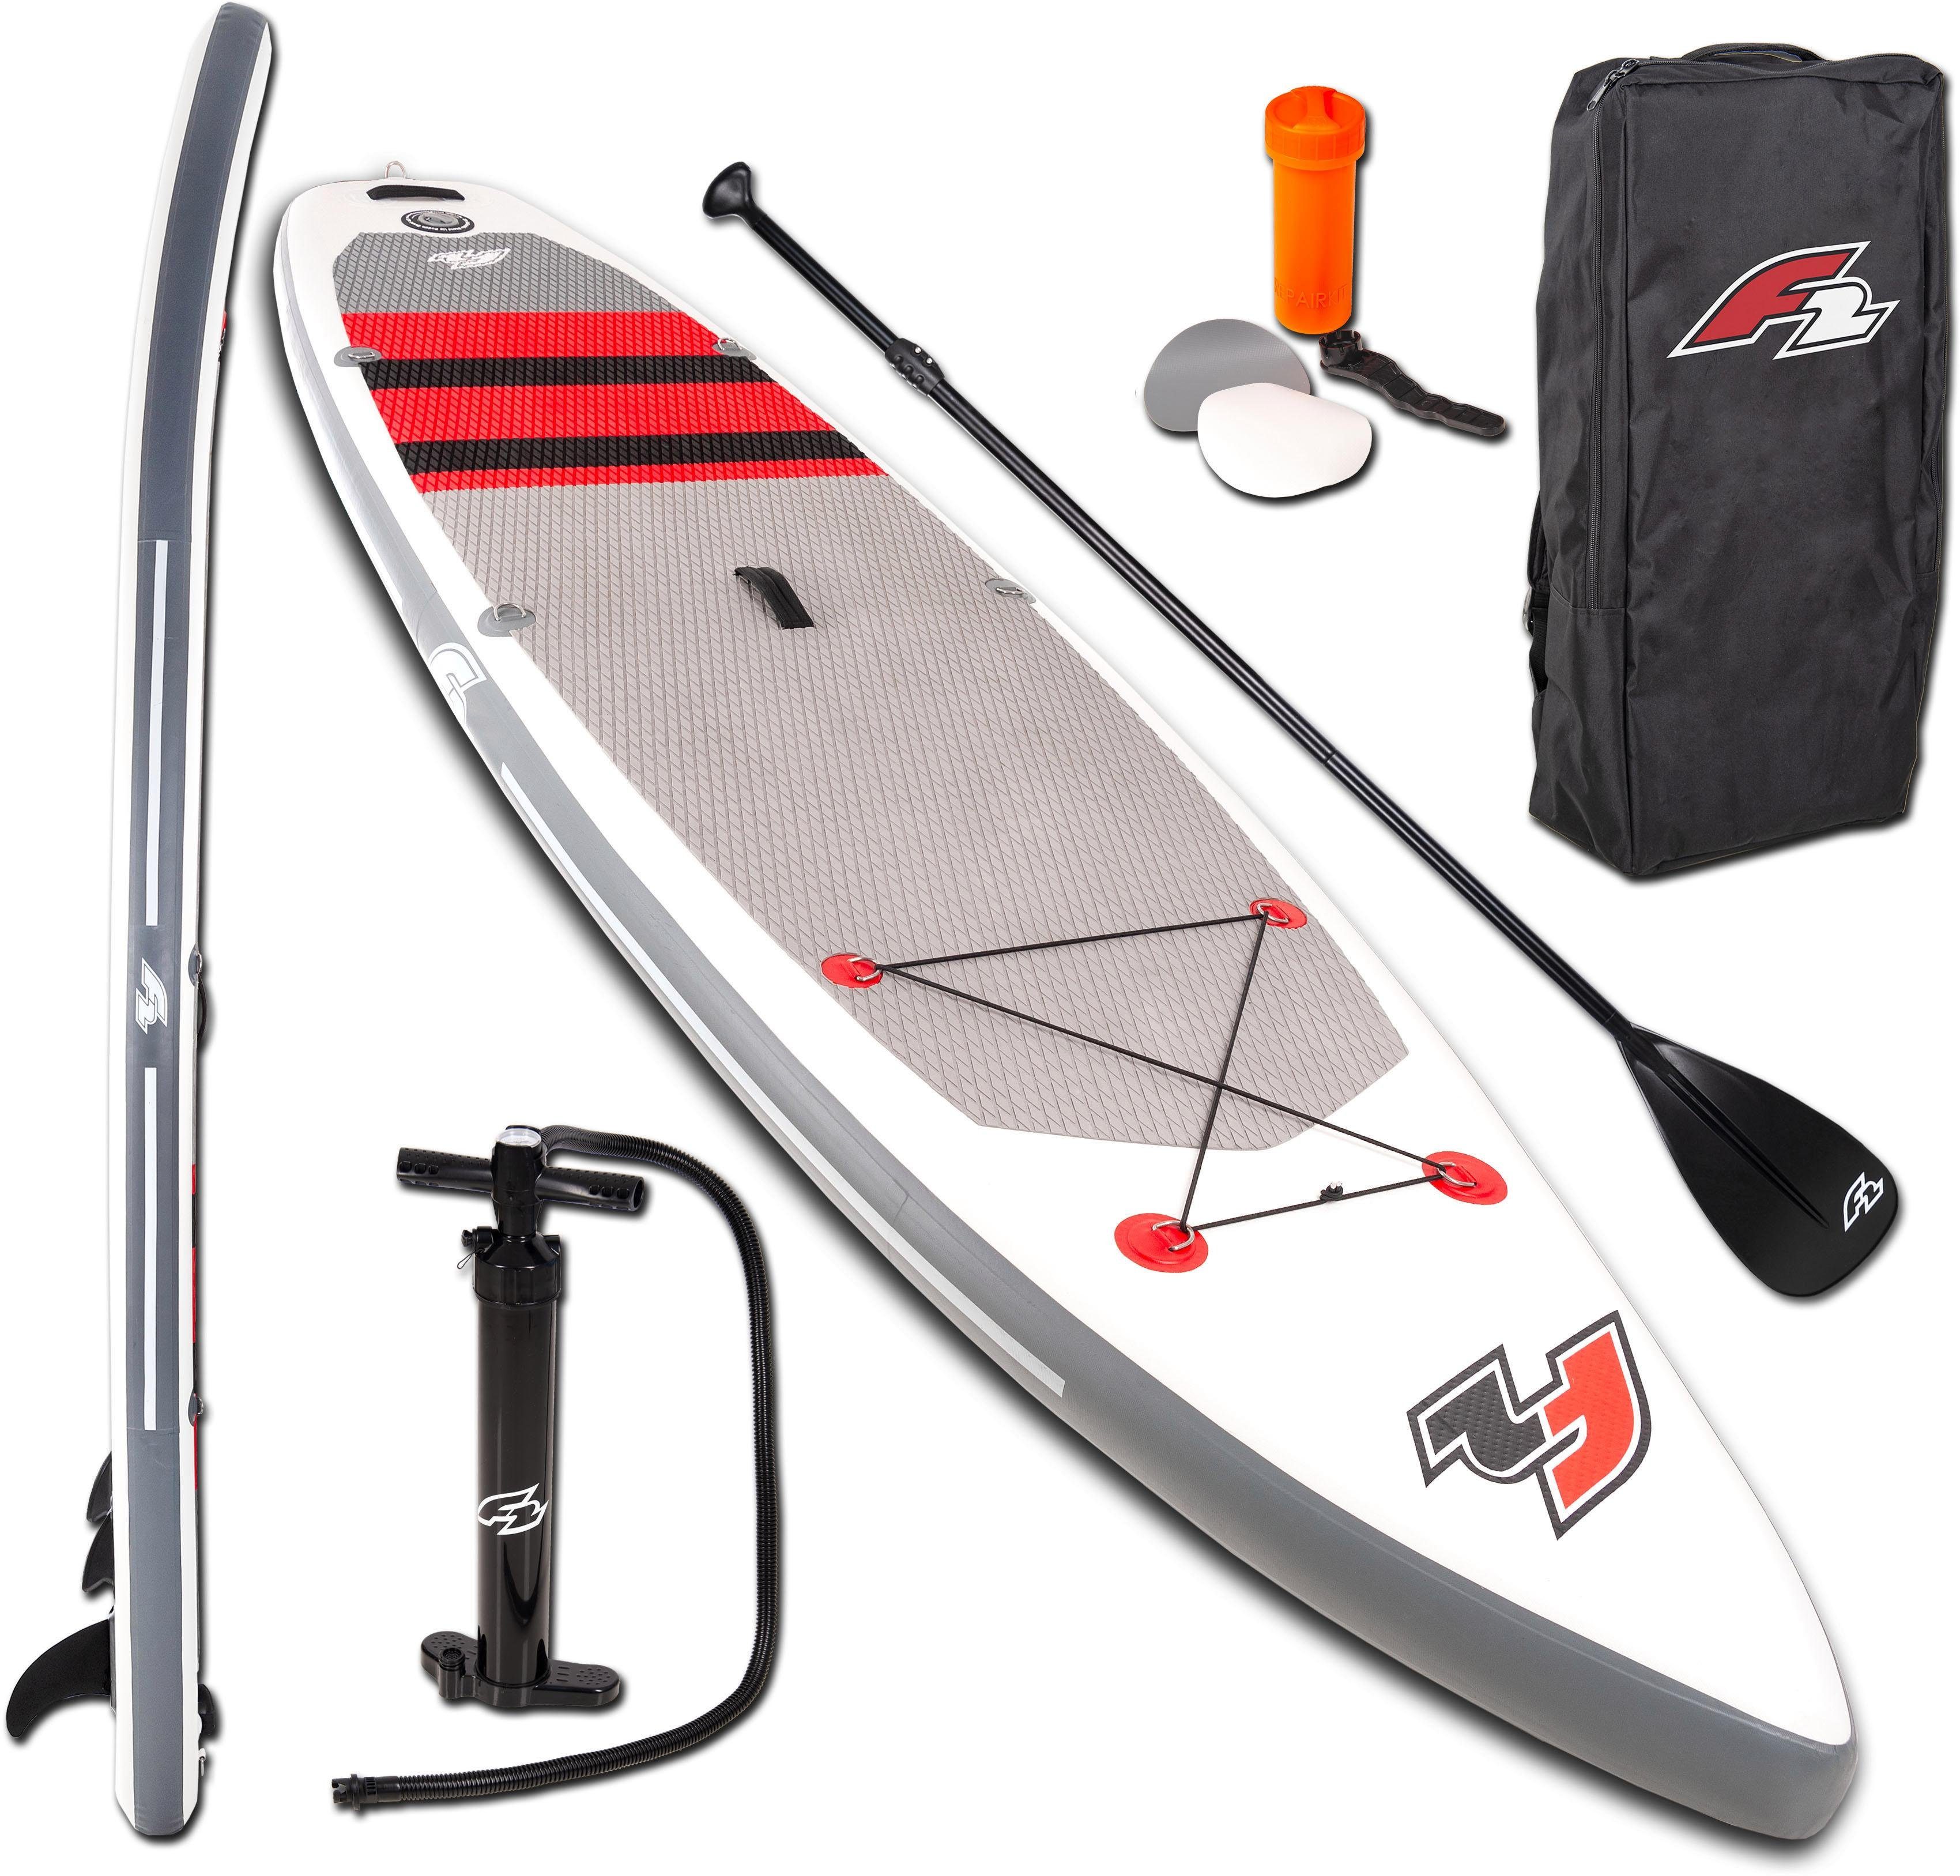 F2 Union 11,5, Inflatable tlg), SUP-Board Up Stand Paddling 5 (Set,